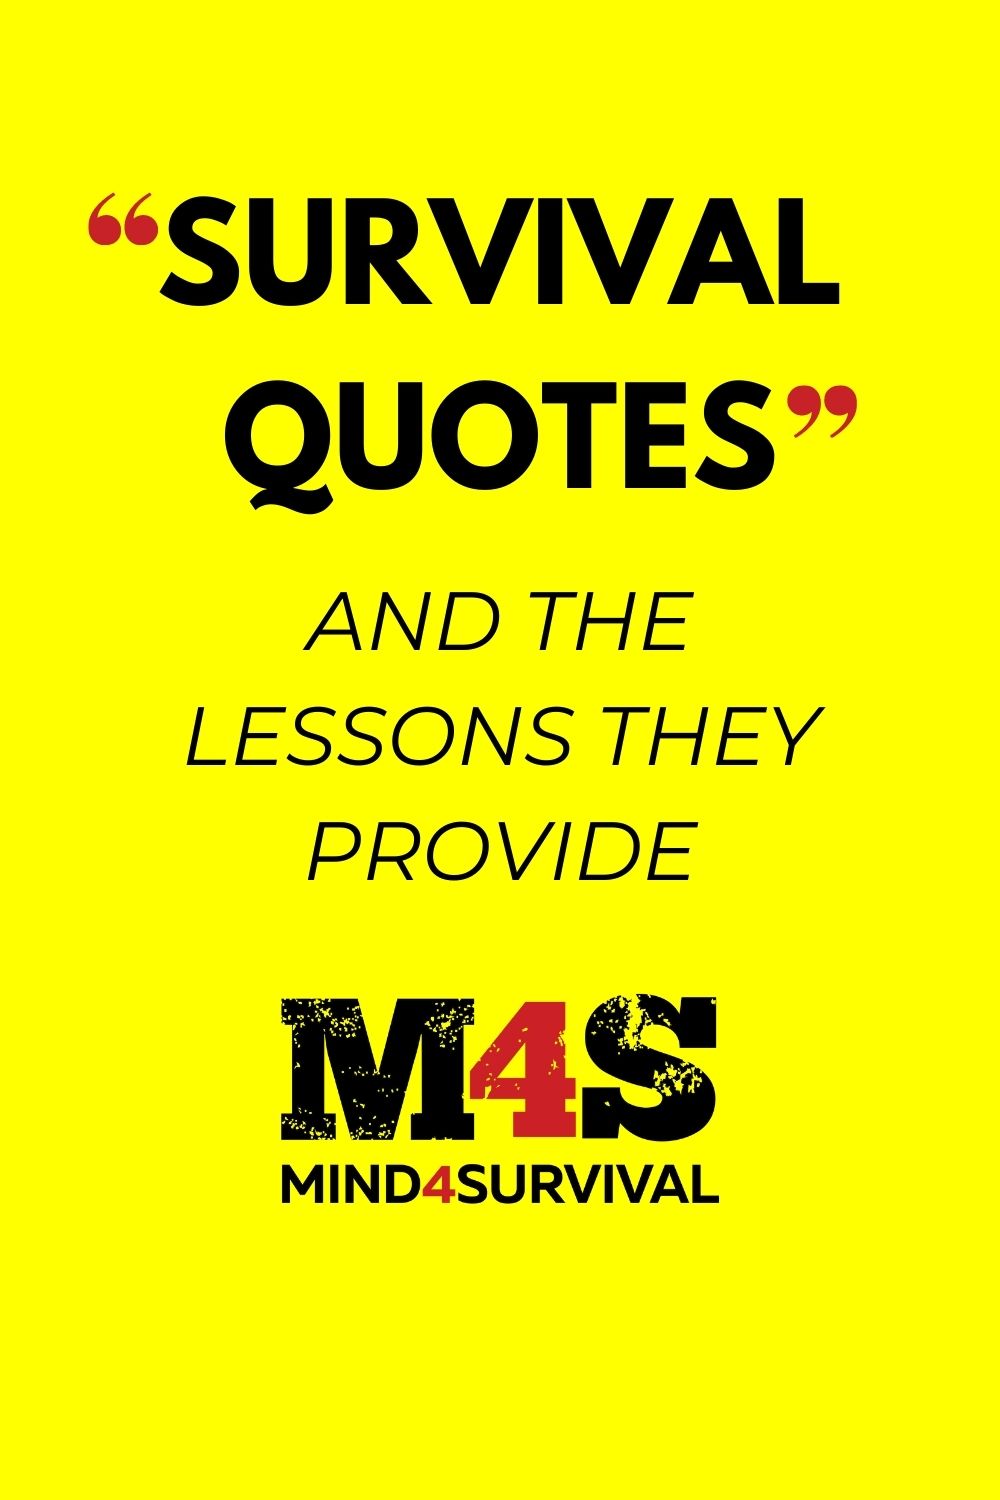 7 Best Survival Quotes to Motivate and Keep You Going!